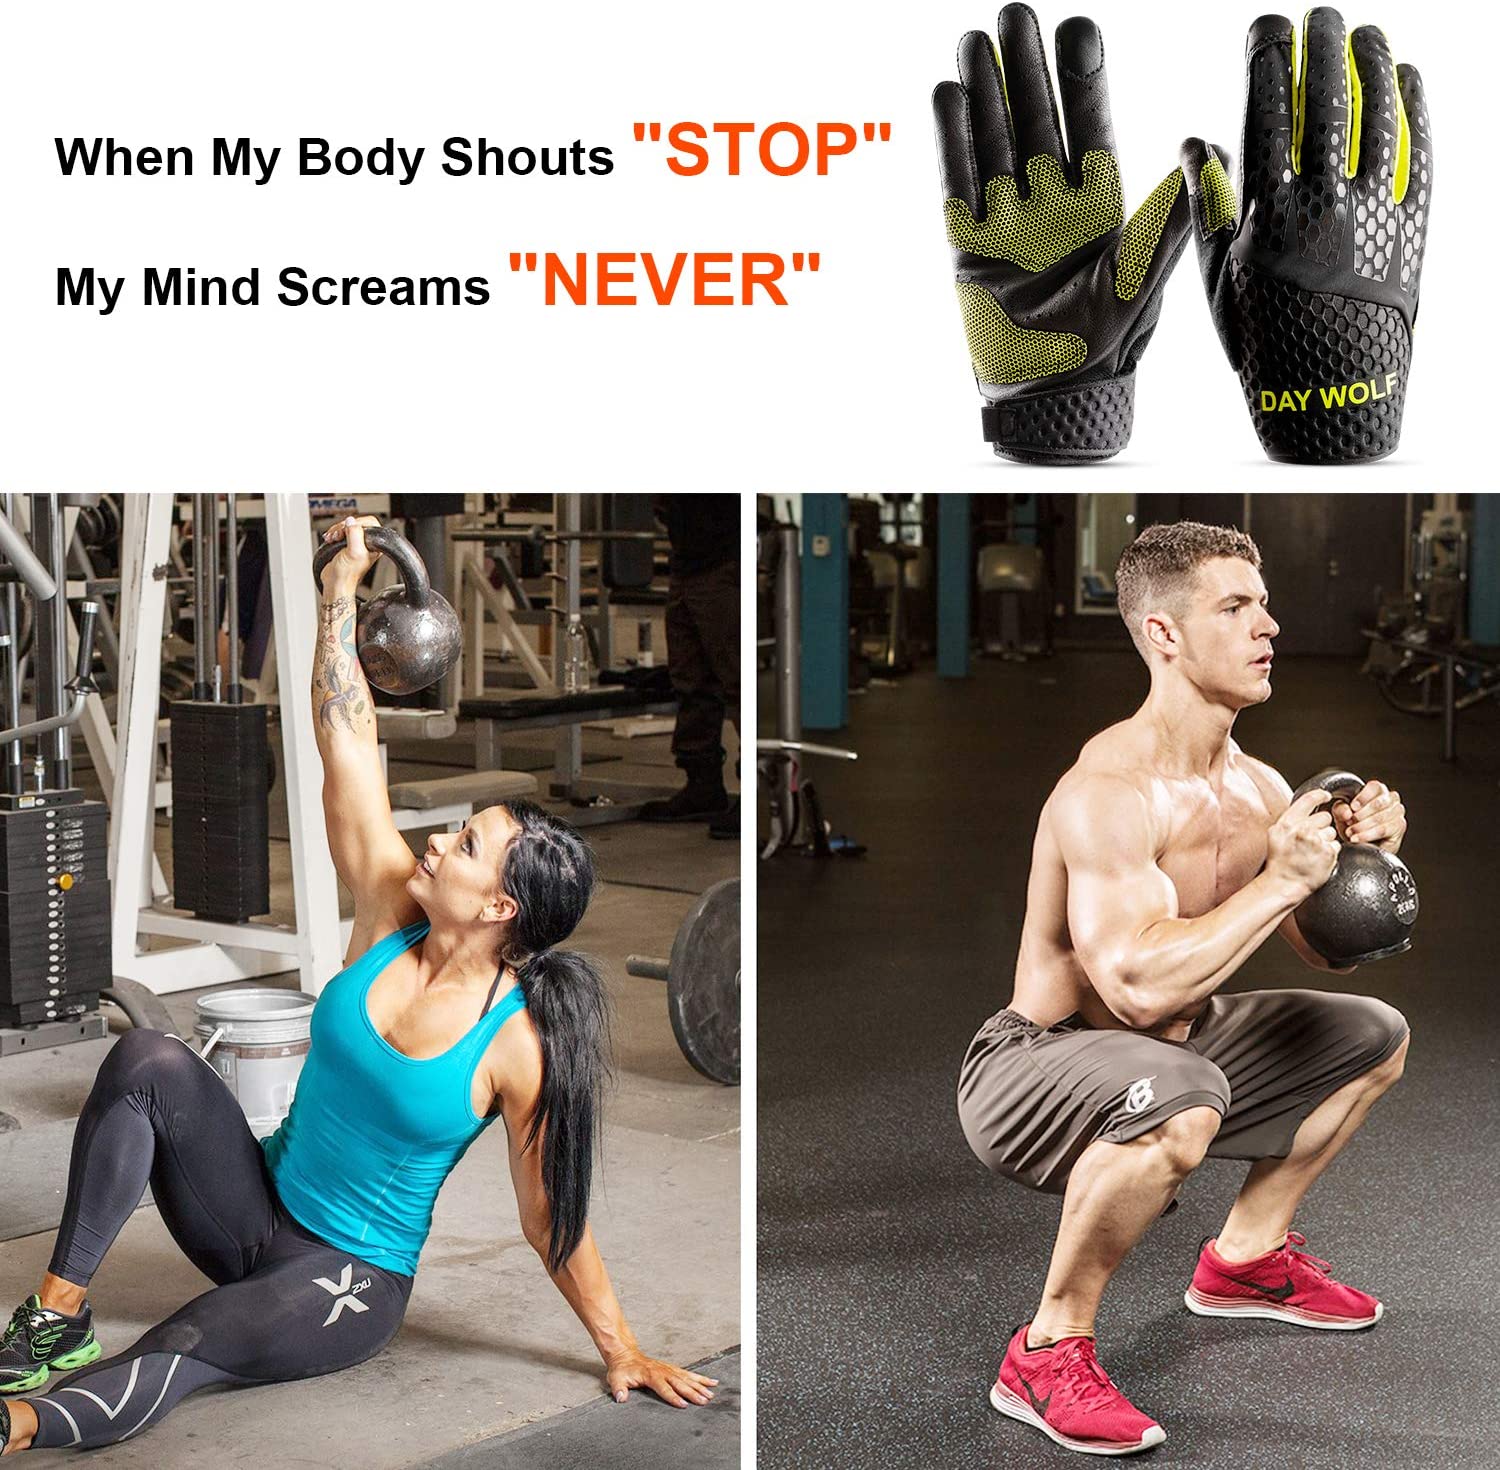 Gym Gloves Fitness Weight Lifting Gloves Body Building Training Sports Exercise Cycling Sport Workout Glove for Men Women - adamshealthstore